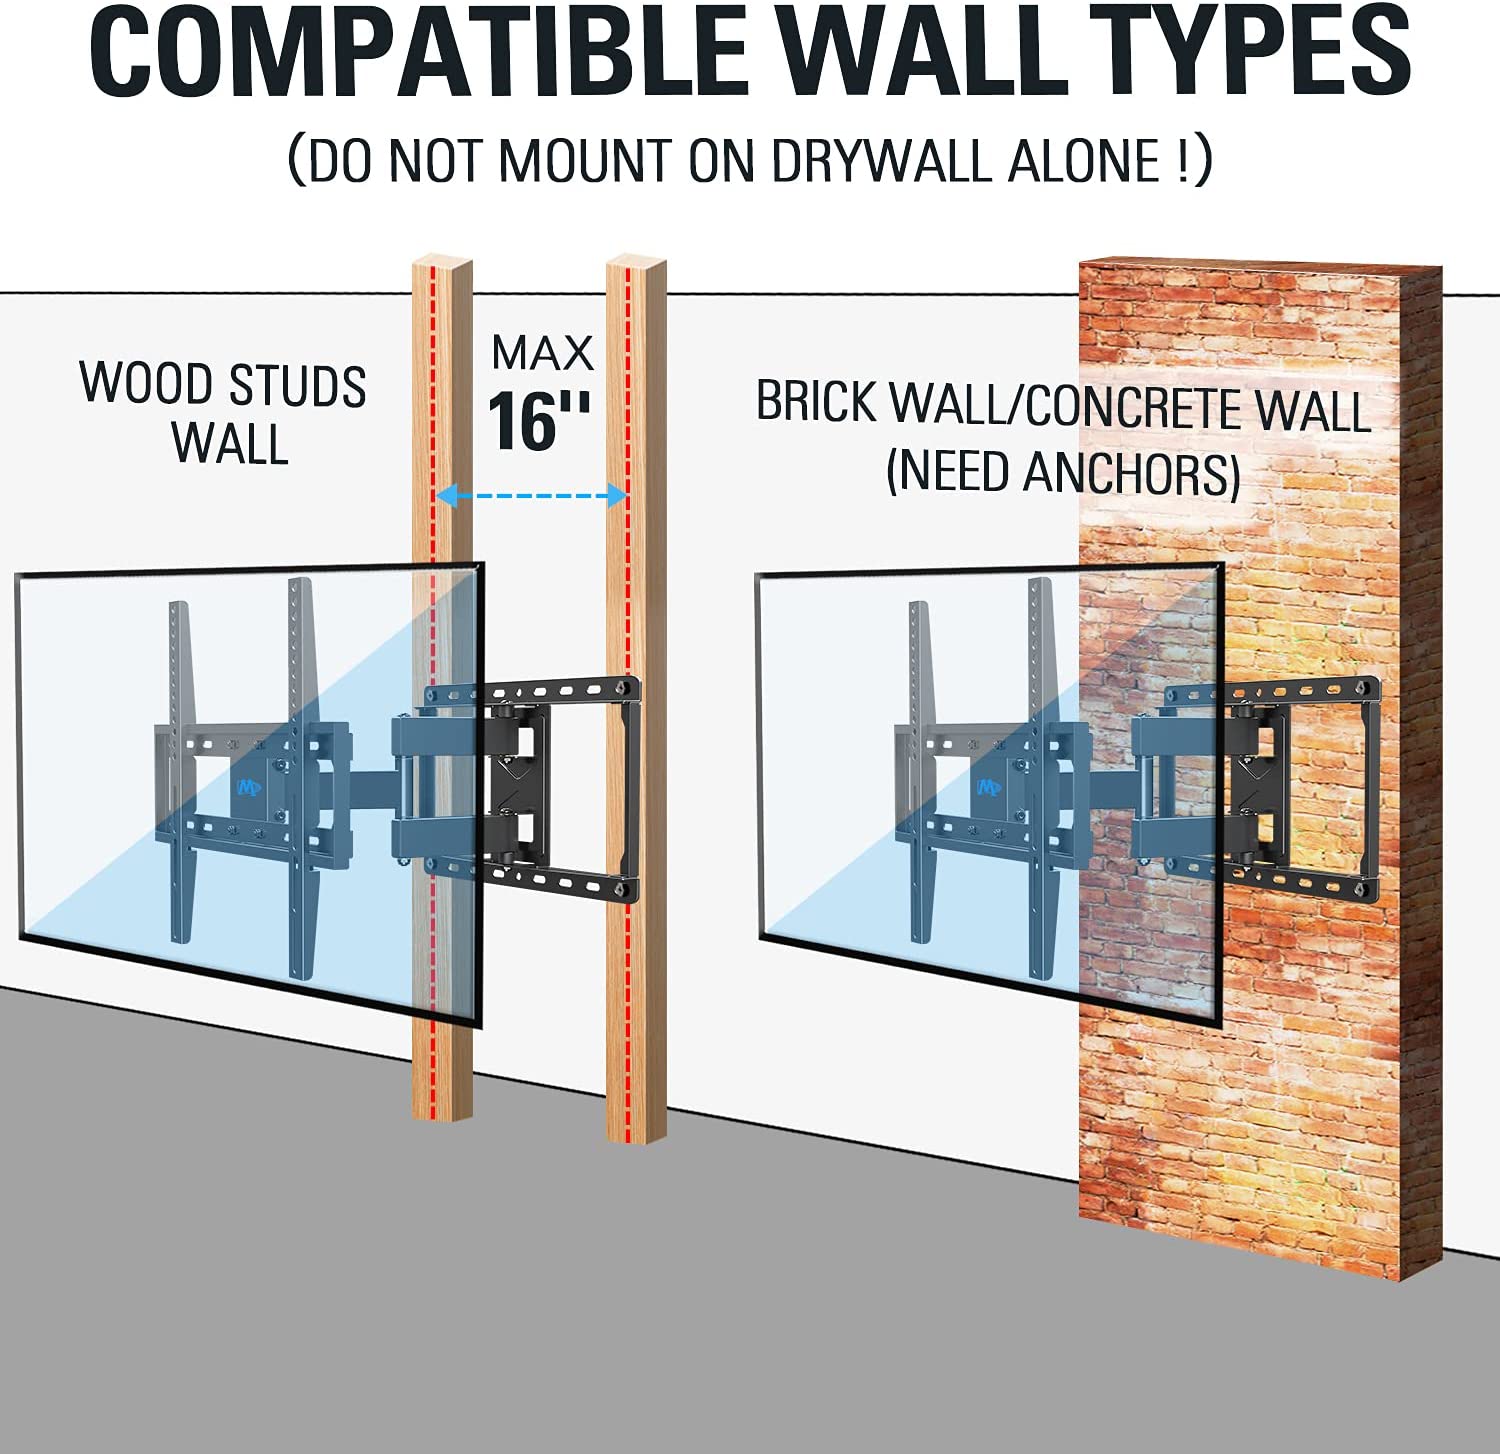 install on 16'' wood stud or brick/concrete wall